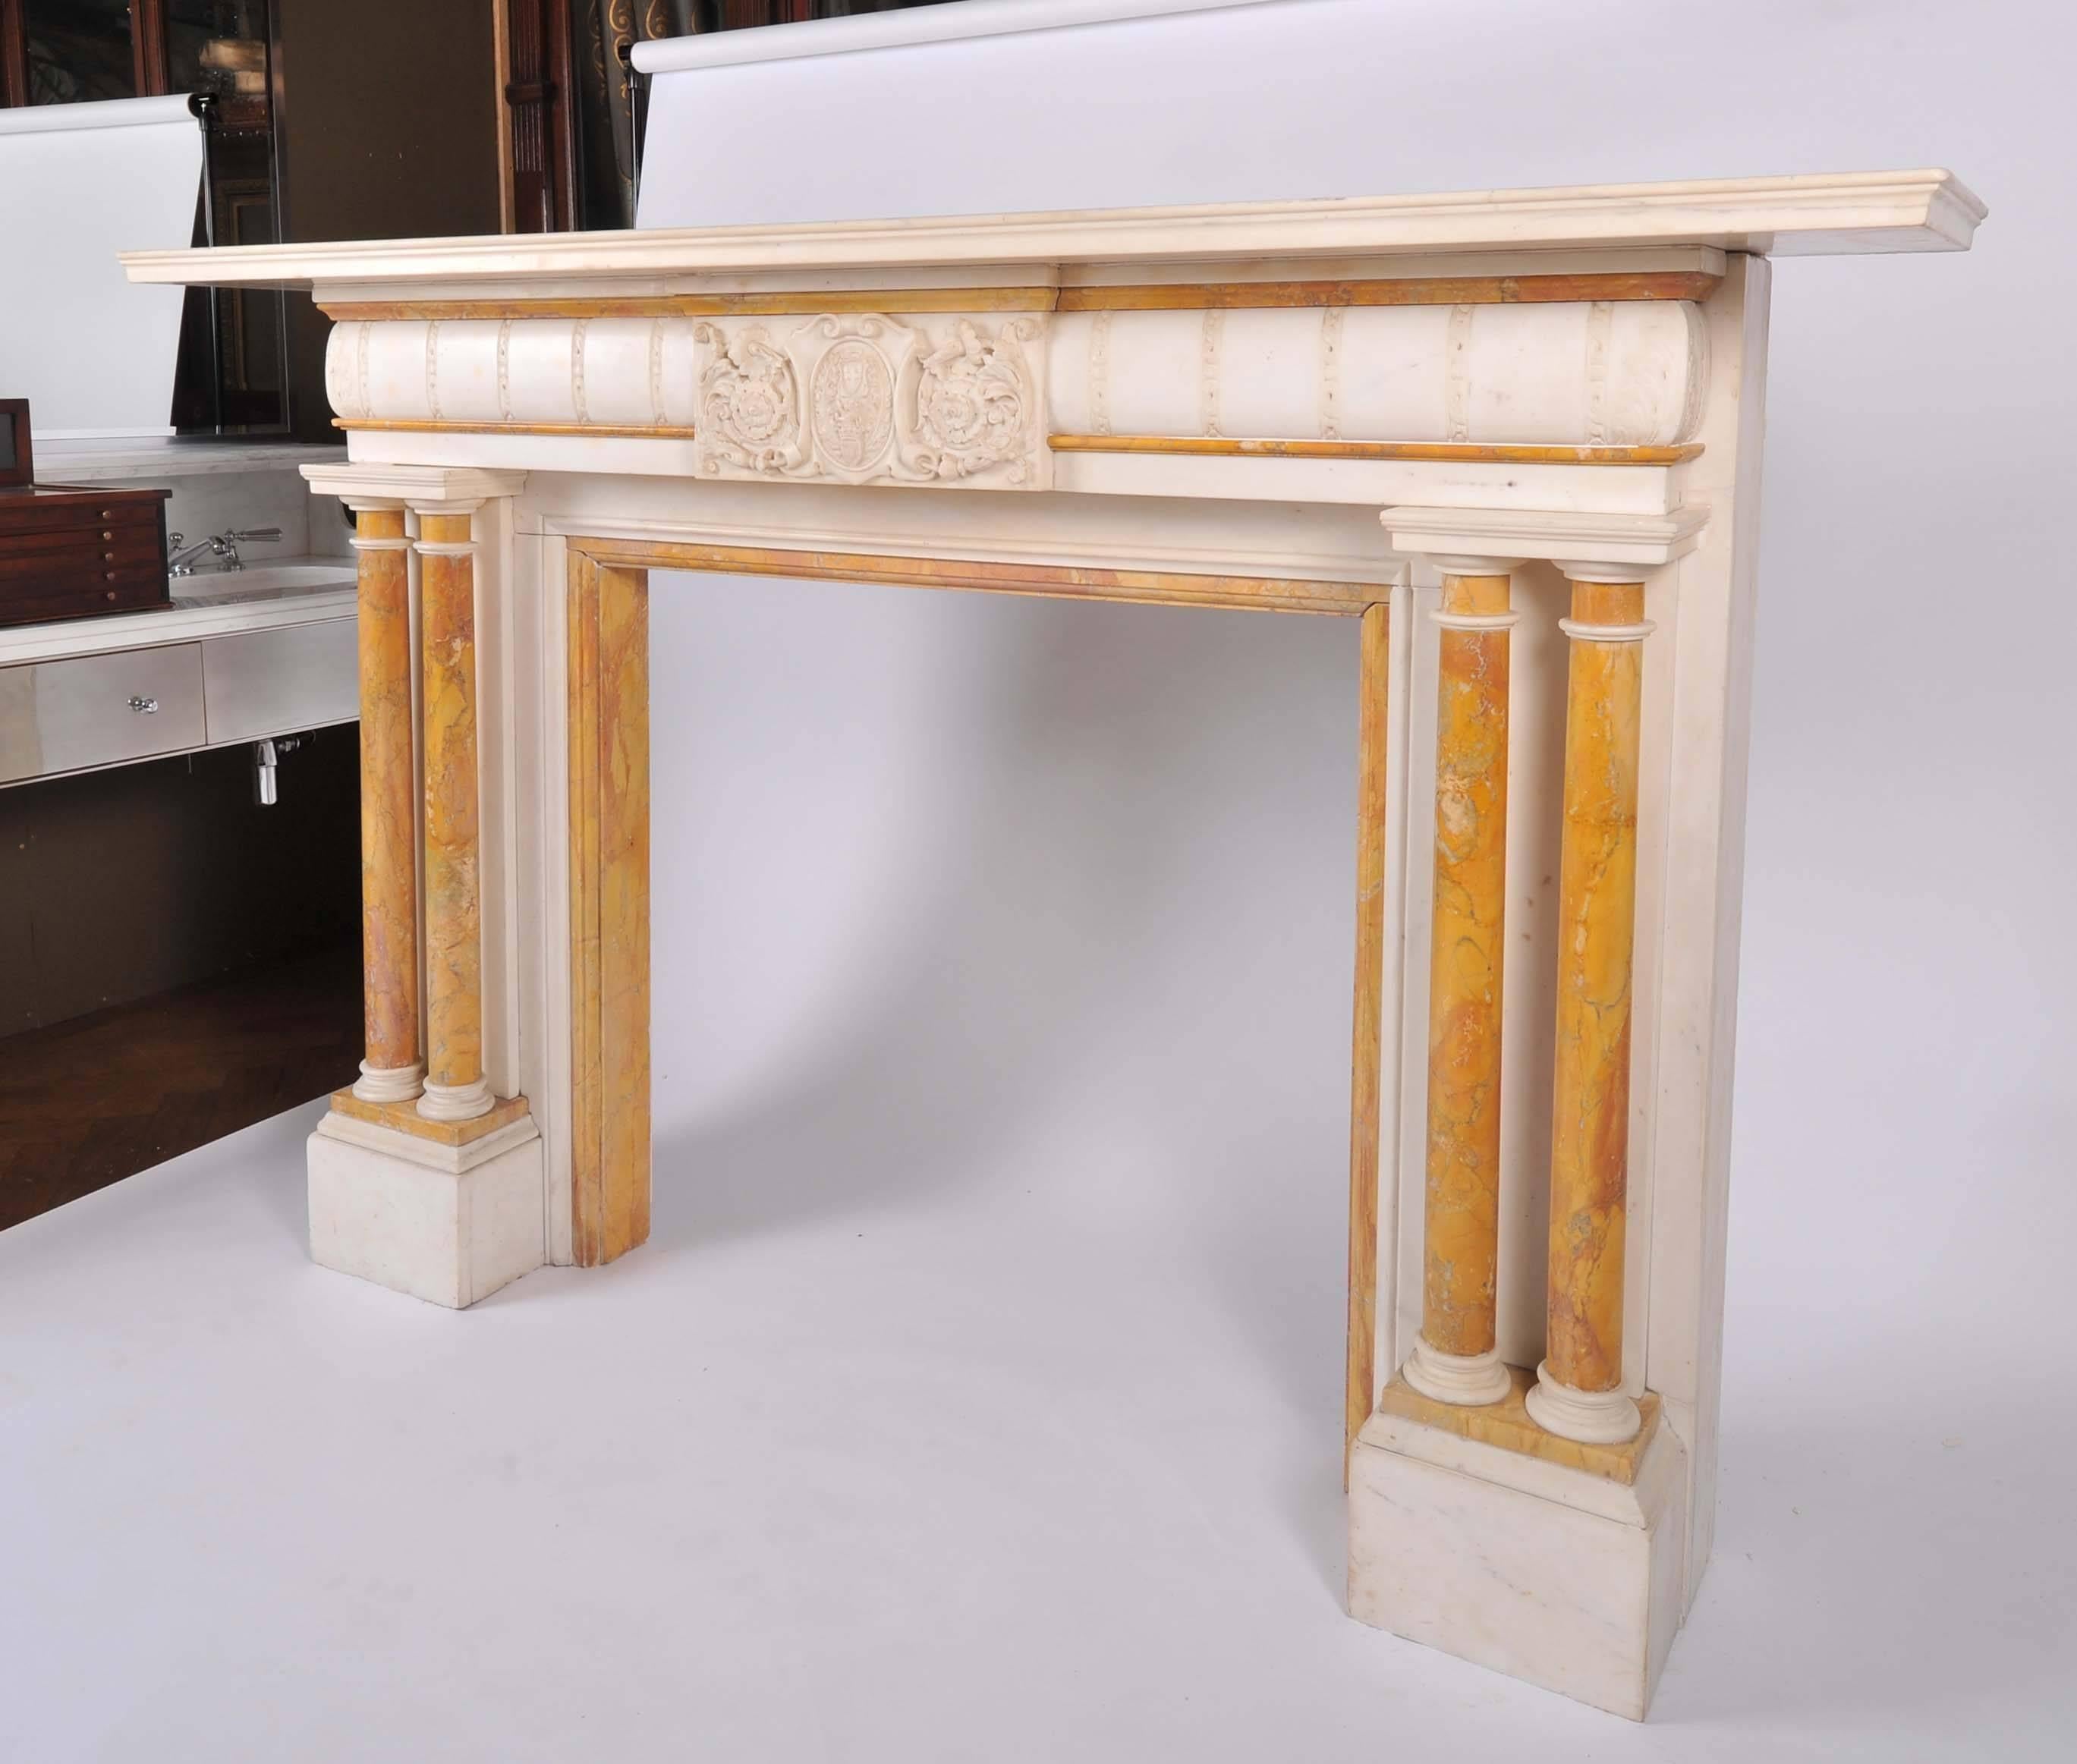 A spectacular 19th century fireplace surround in statuary marble with sienna marble inlay. This original antique fire surround is in grand proportions with an architectural design in the Palladian style. Each jamb features a pair of sienna marble